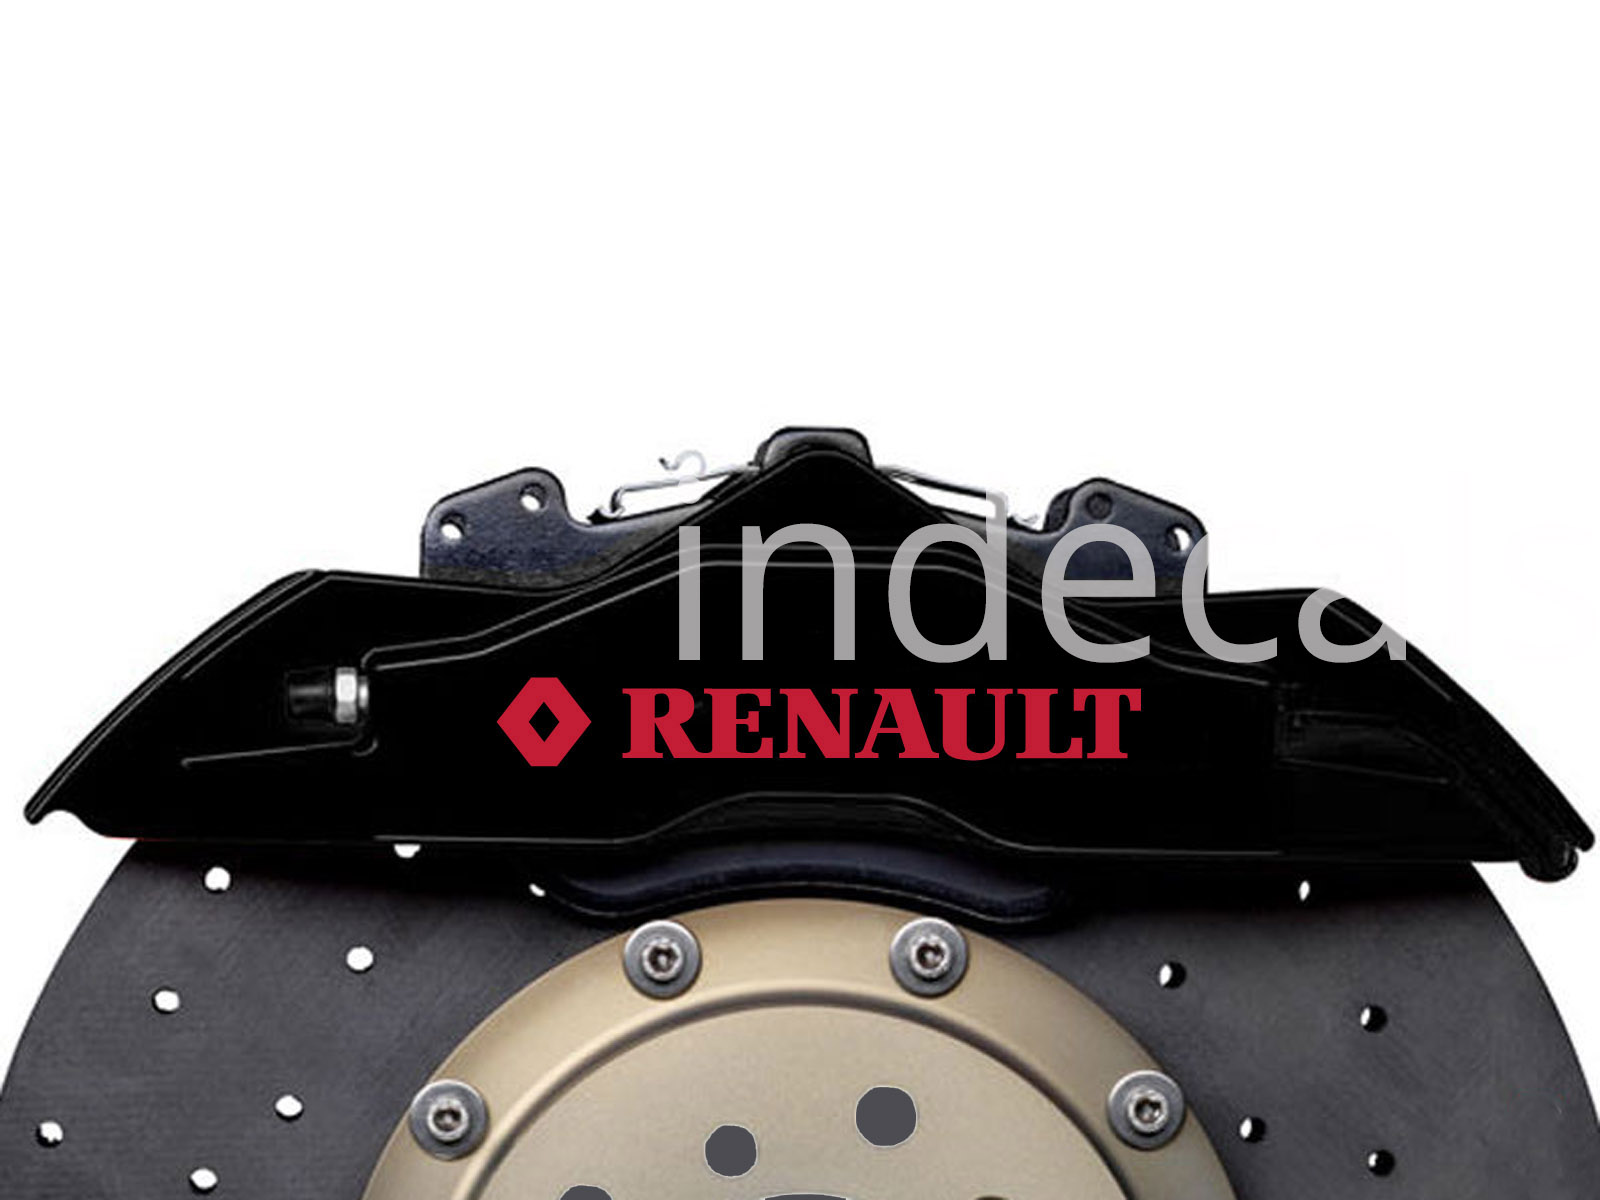 6 x Renault Stickers for Brakes - Red